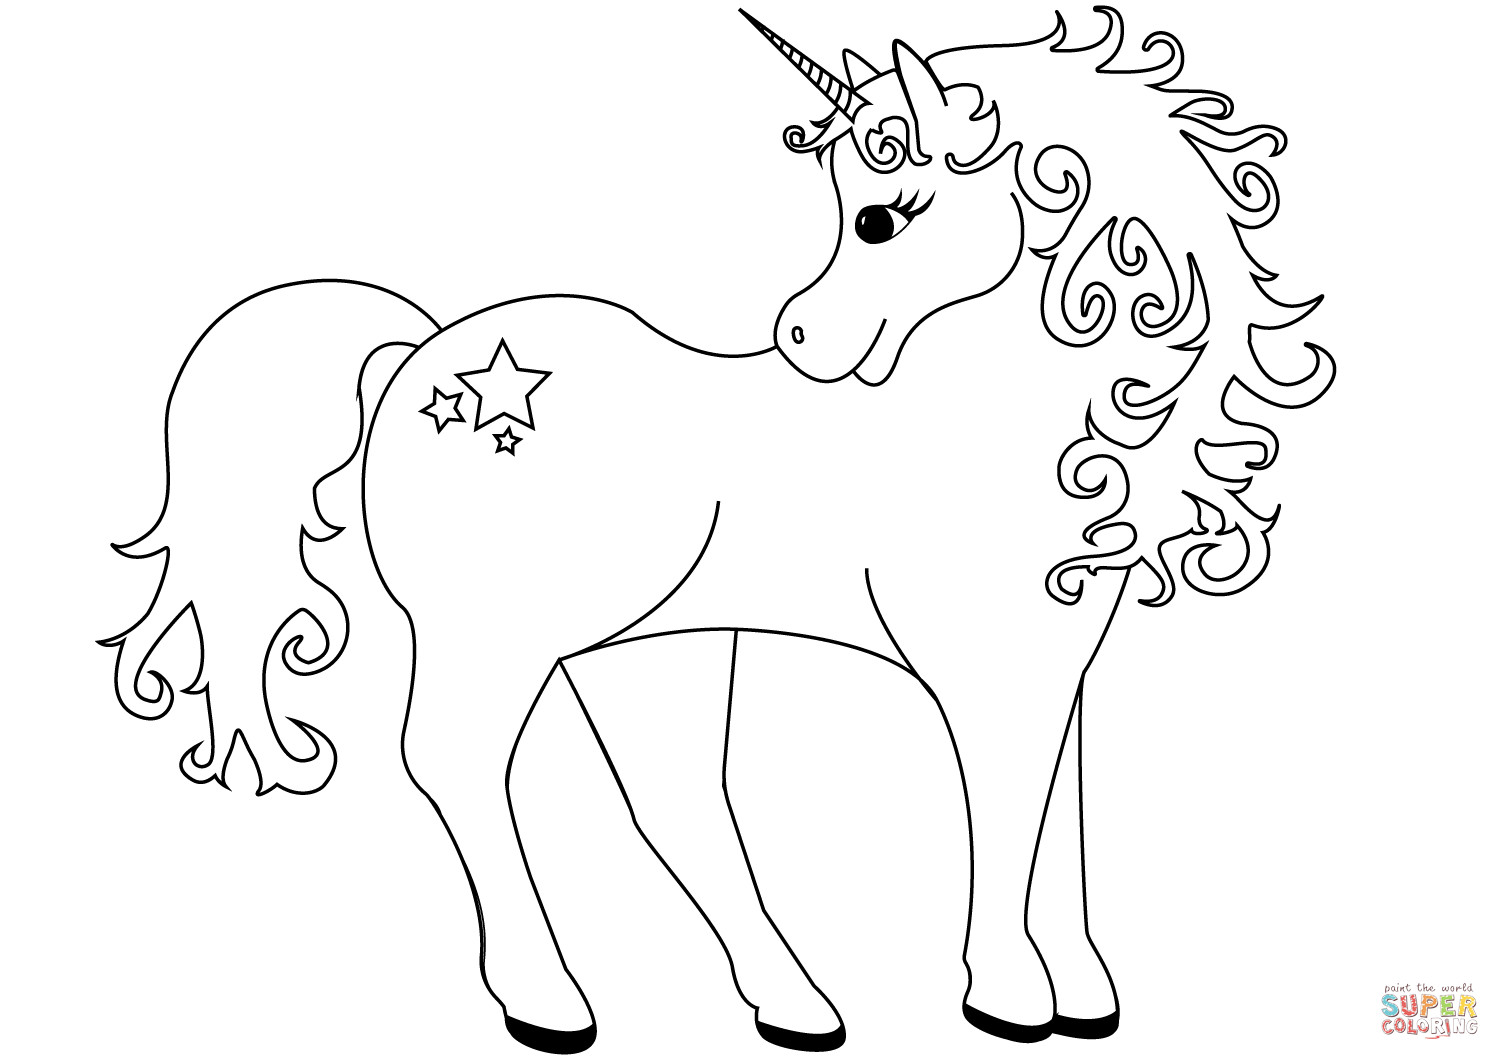 Printable Coloring Pages Unicorn
 Lovely Unicorn coloring page